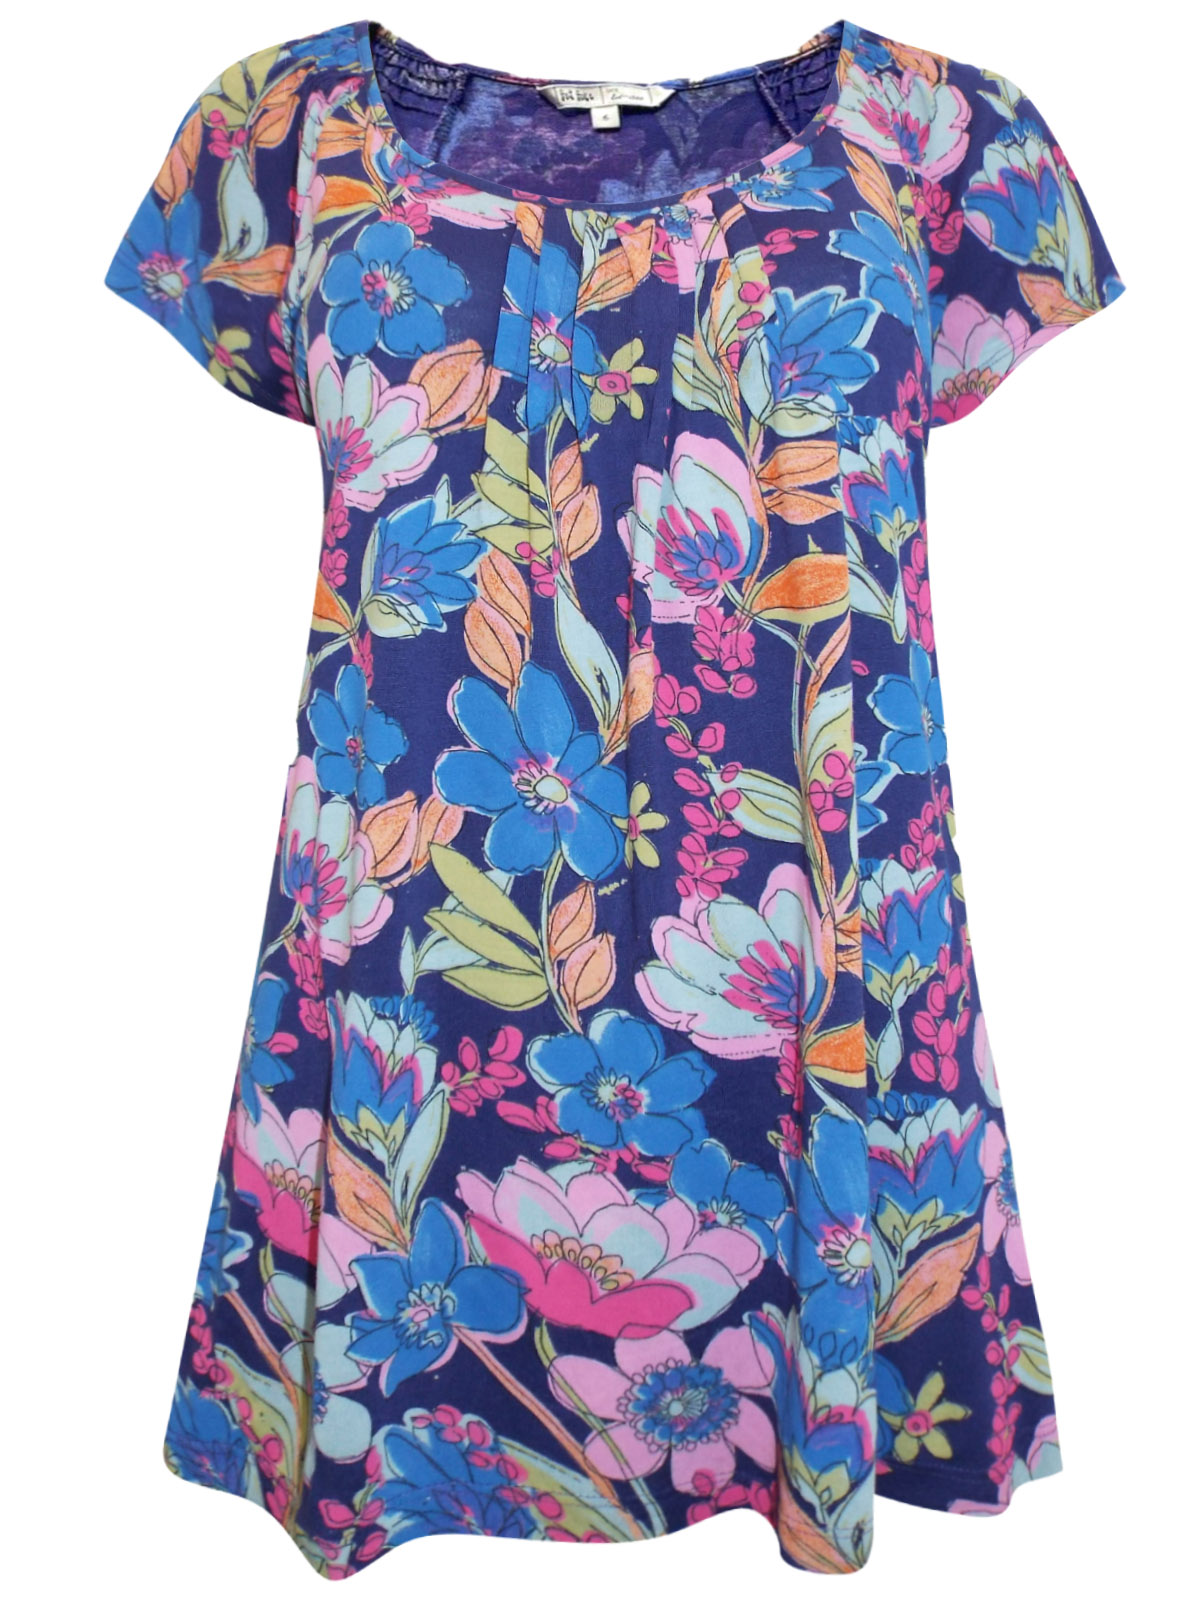 FAT FACE - - Fat Face BLUE Floral Print Short Sleeve Top - Size 10 to 12